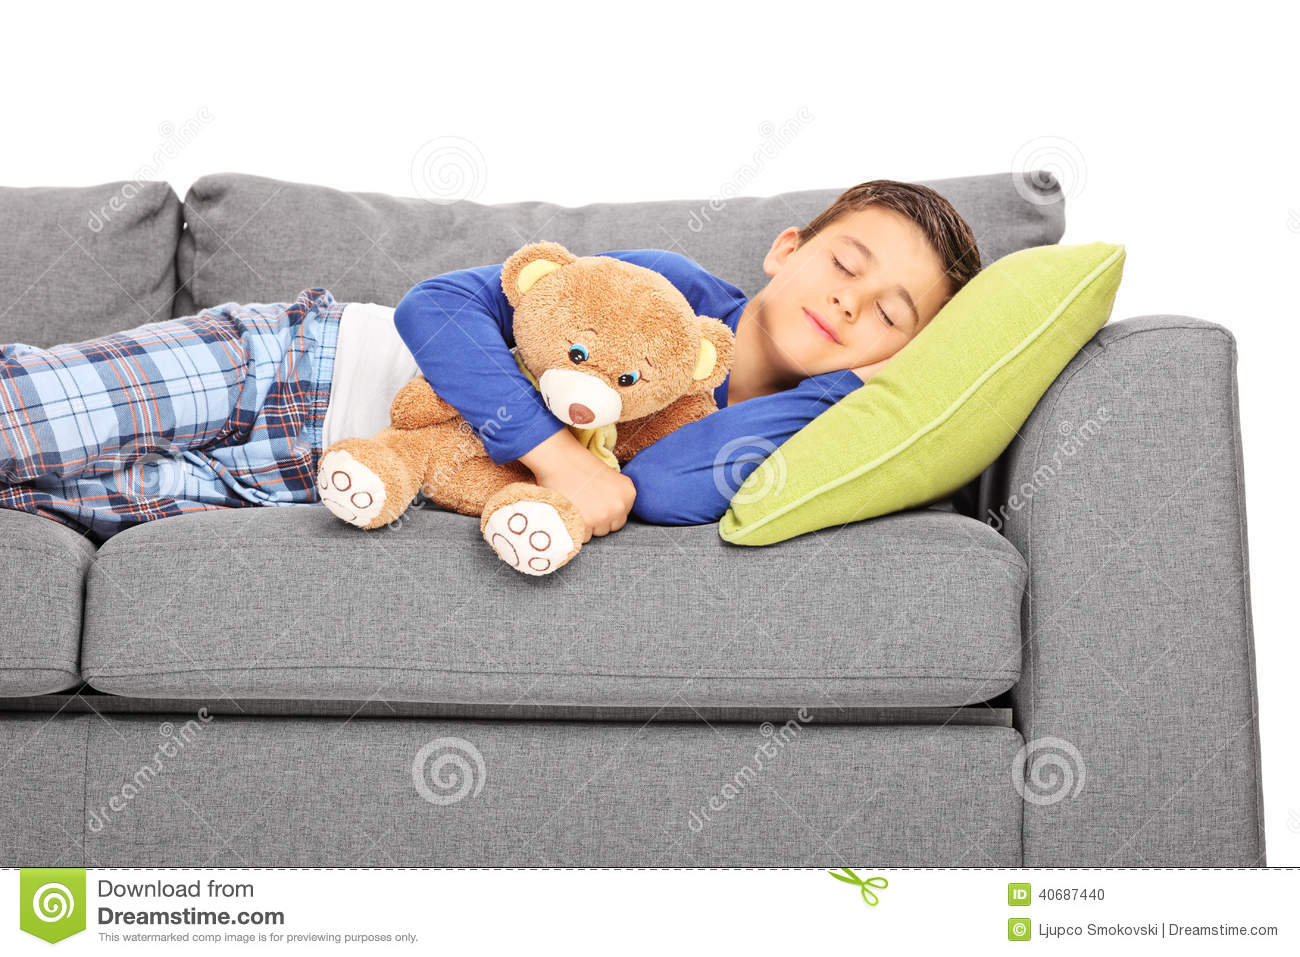 little-boy-taking-nap-couch-isolated-white-background-40687440.jpg